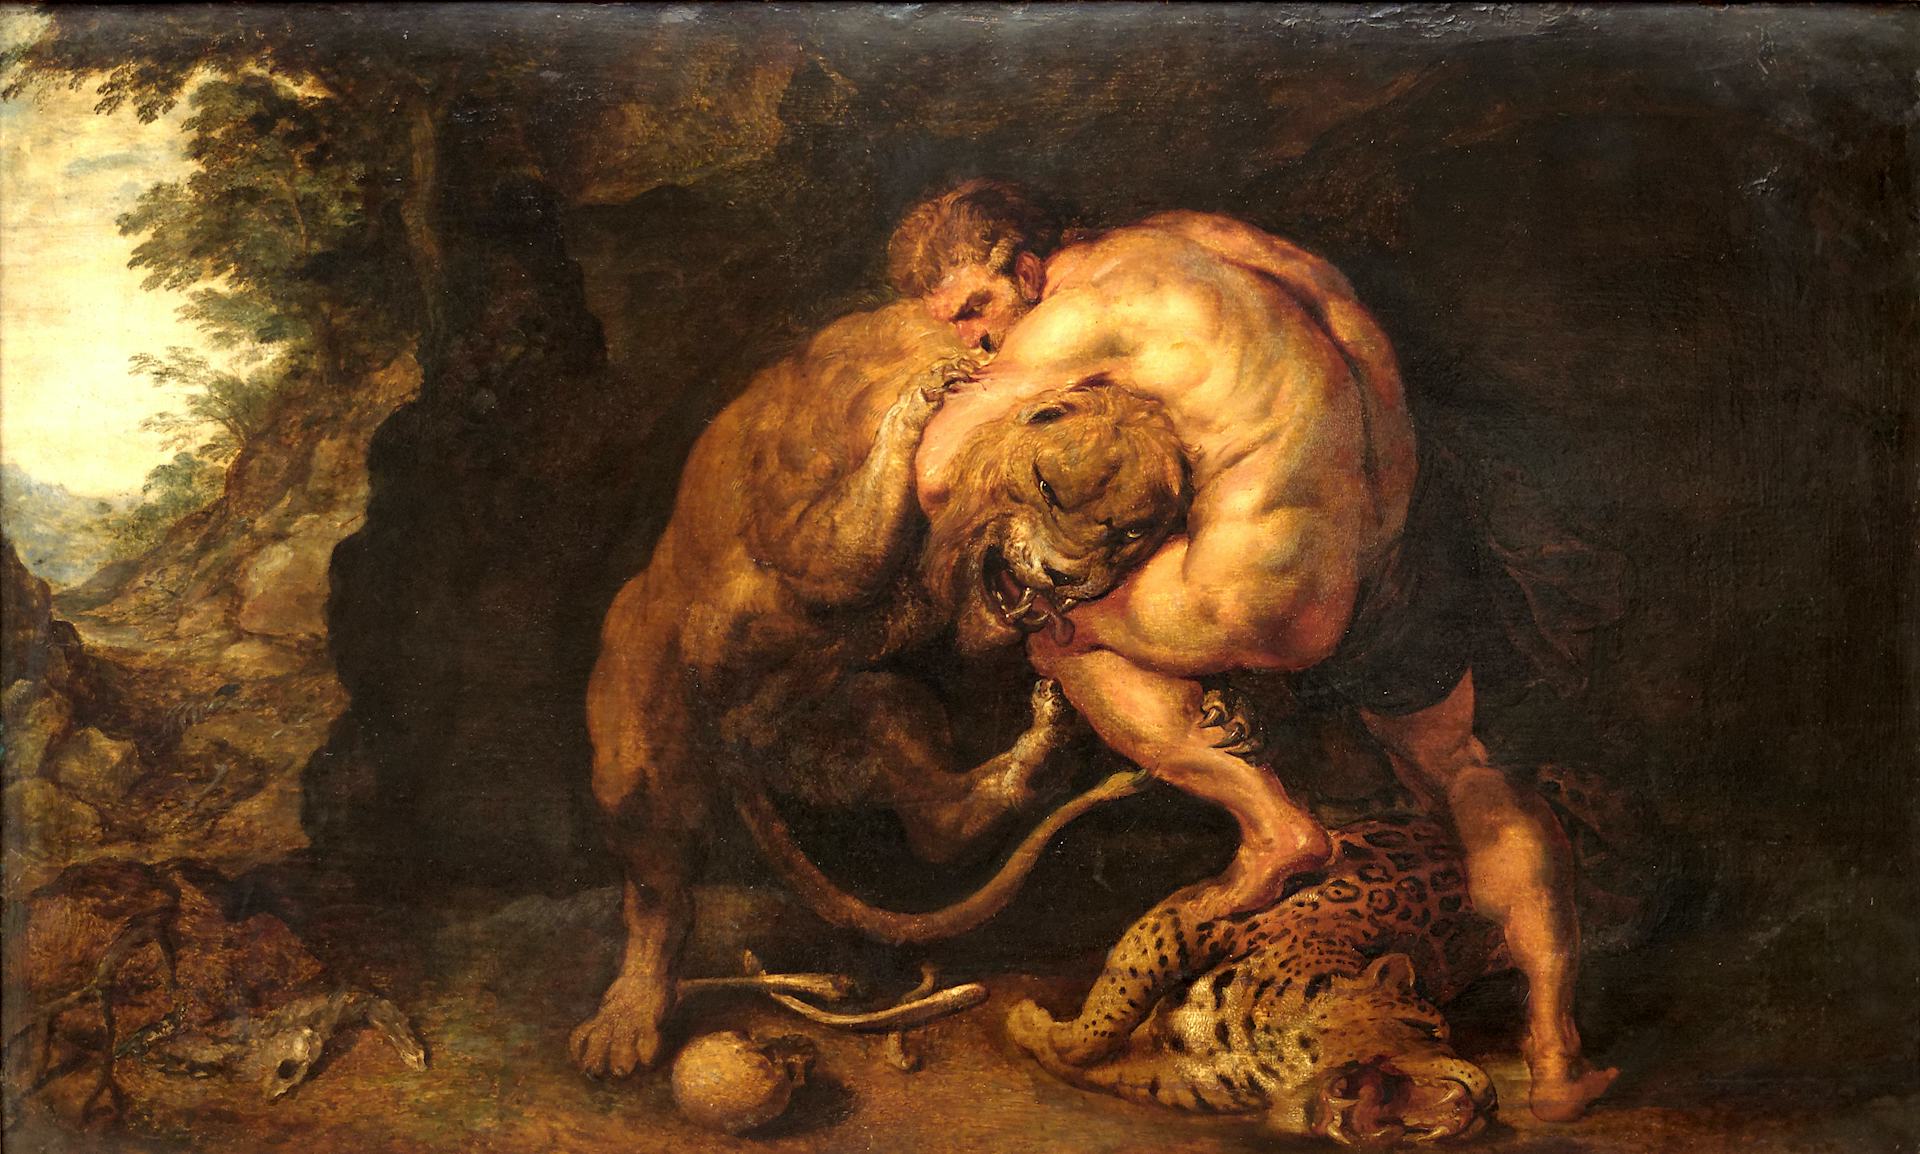 Hercules and the Nemean lion by Peter Paul Rubens (ca. 1615)